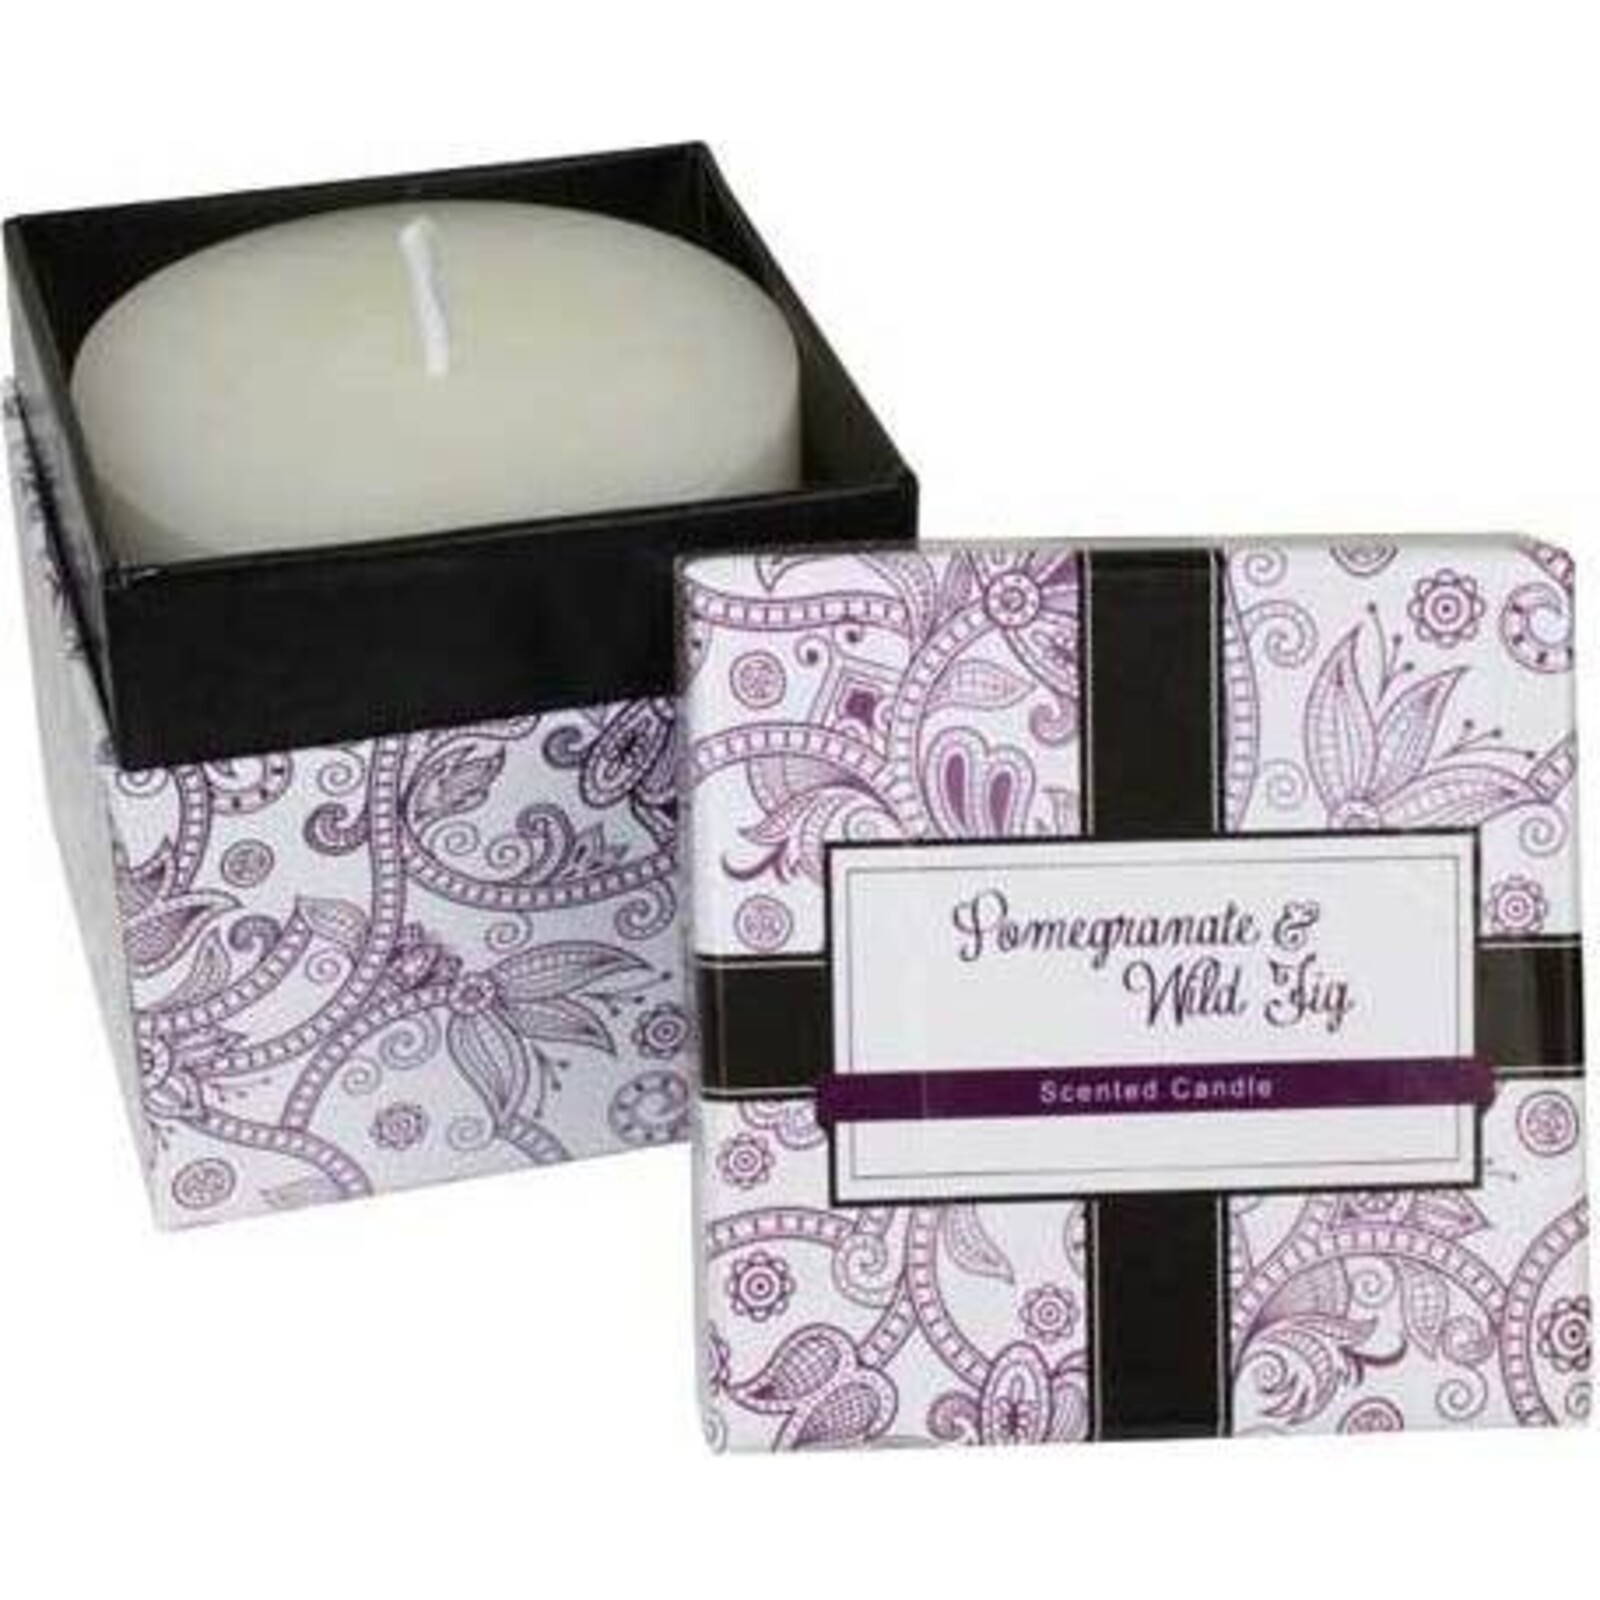 Pomegranate & Wild Fig Boxed Candle - 7.5cm